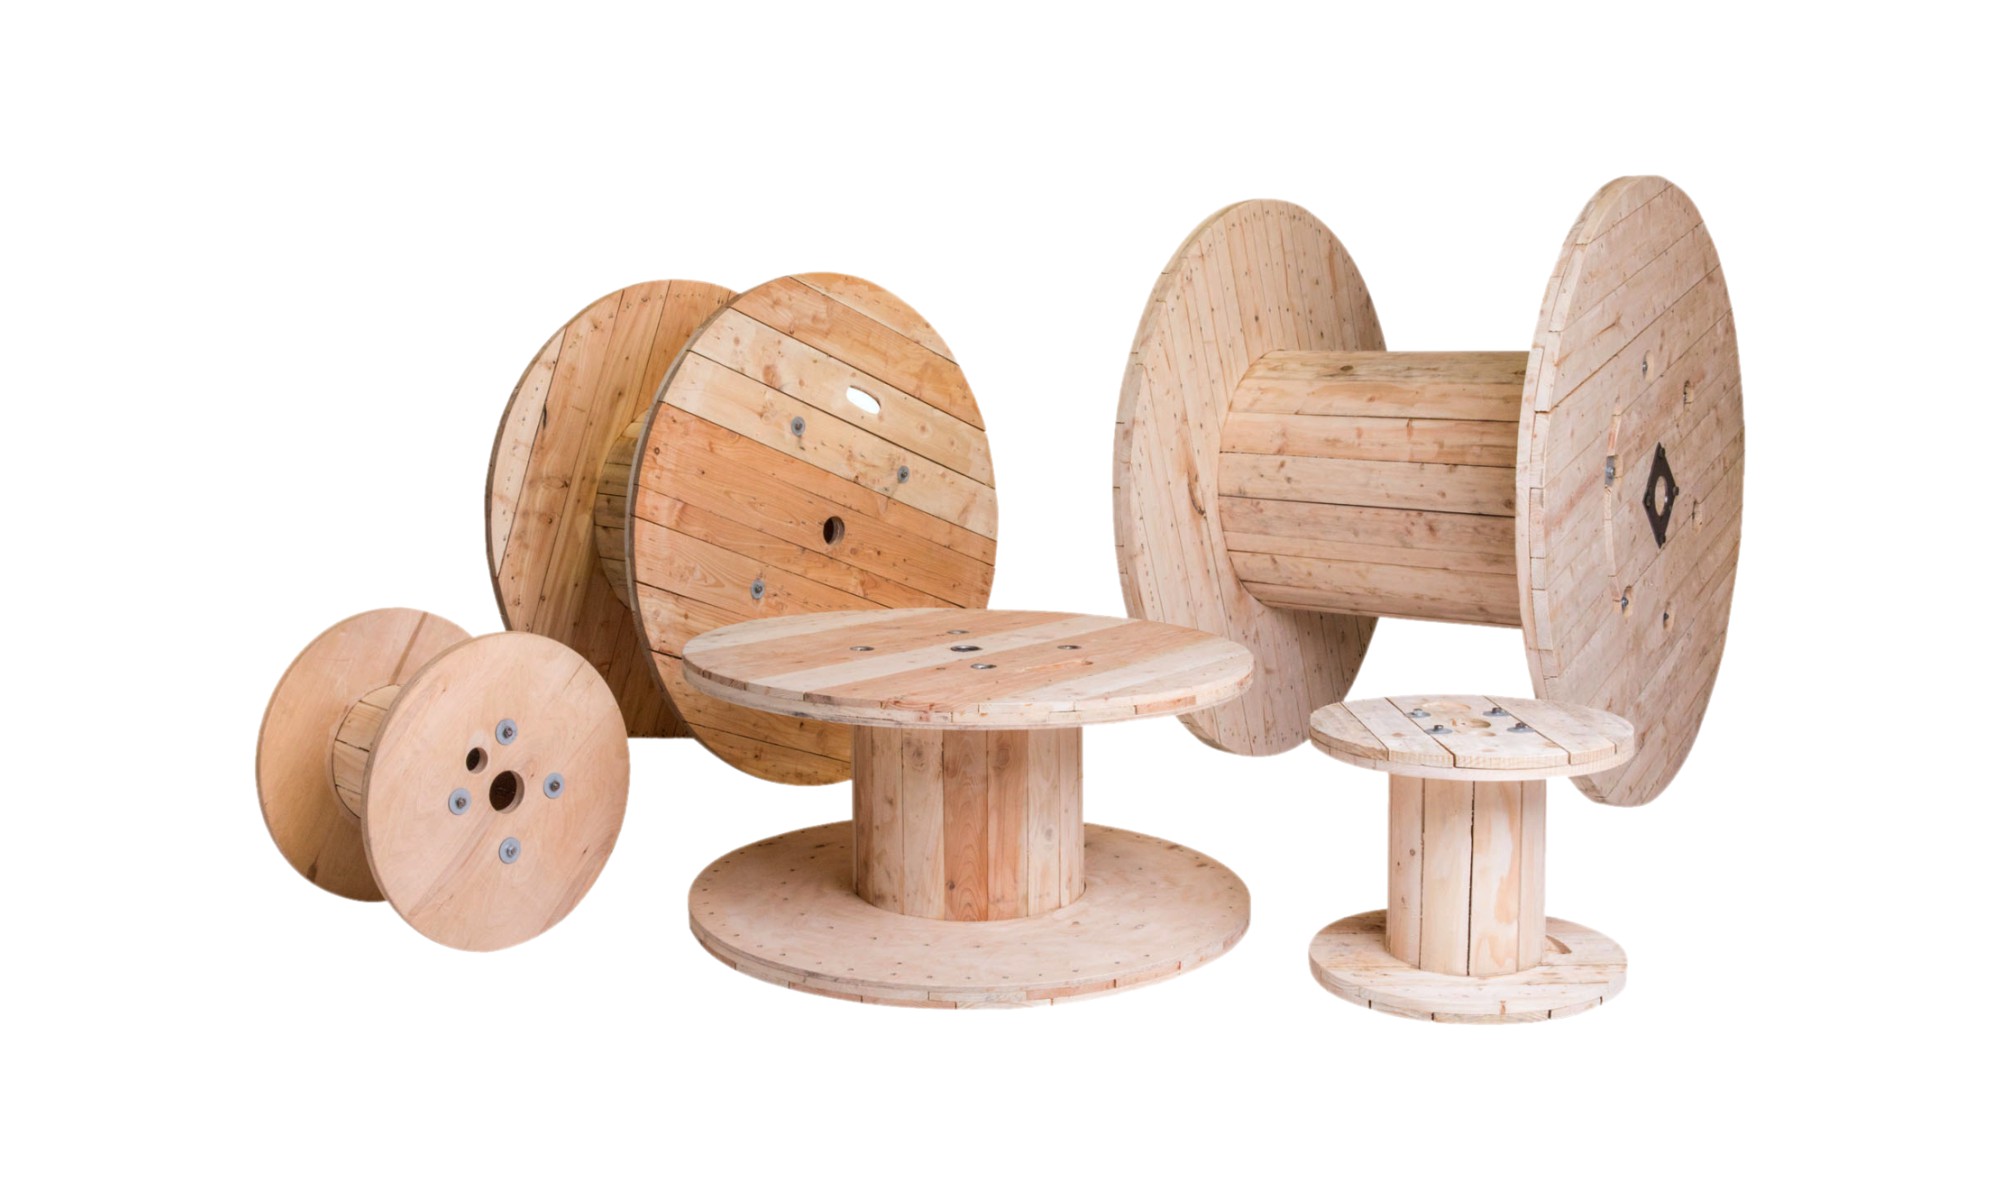 Packaging Timber Drums